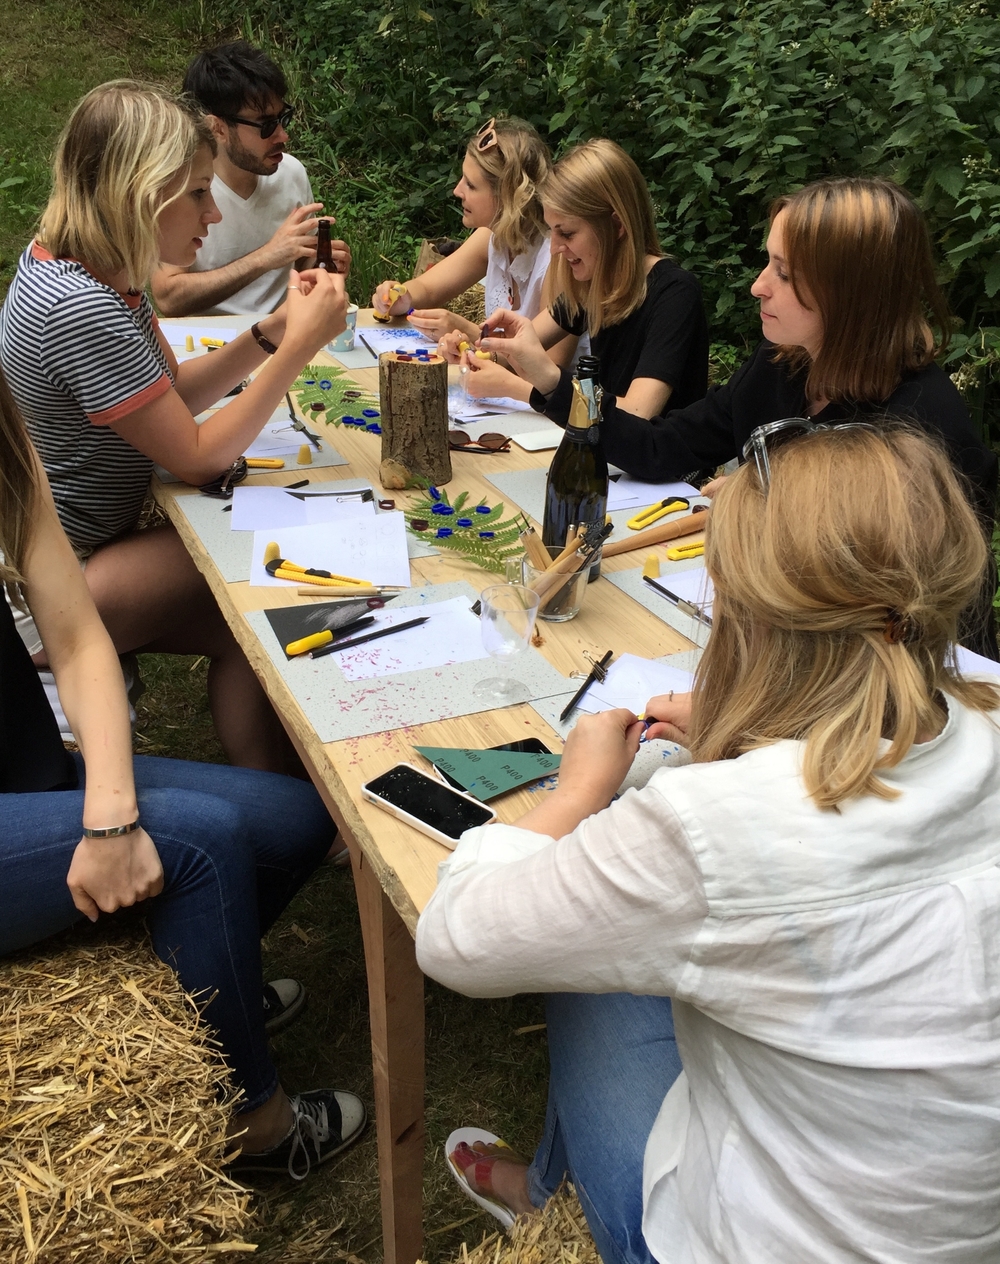  Workbench in the woods with Kirstie MacLaren and Katie Woodward; some serious concentration faces 